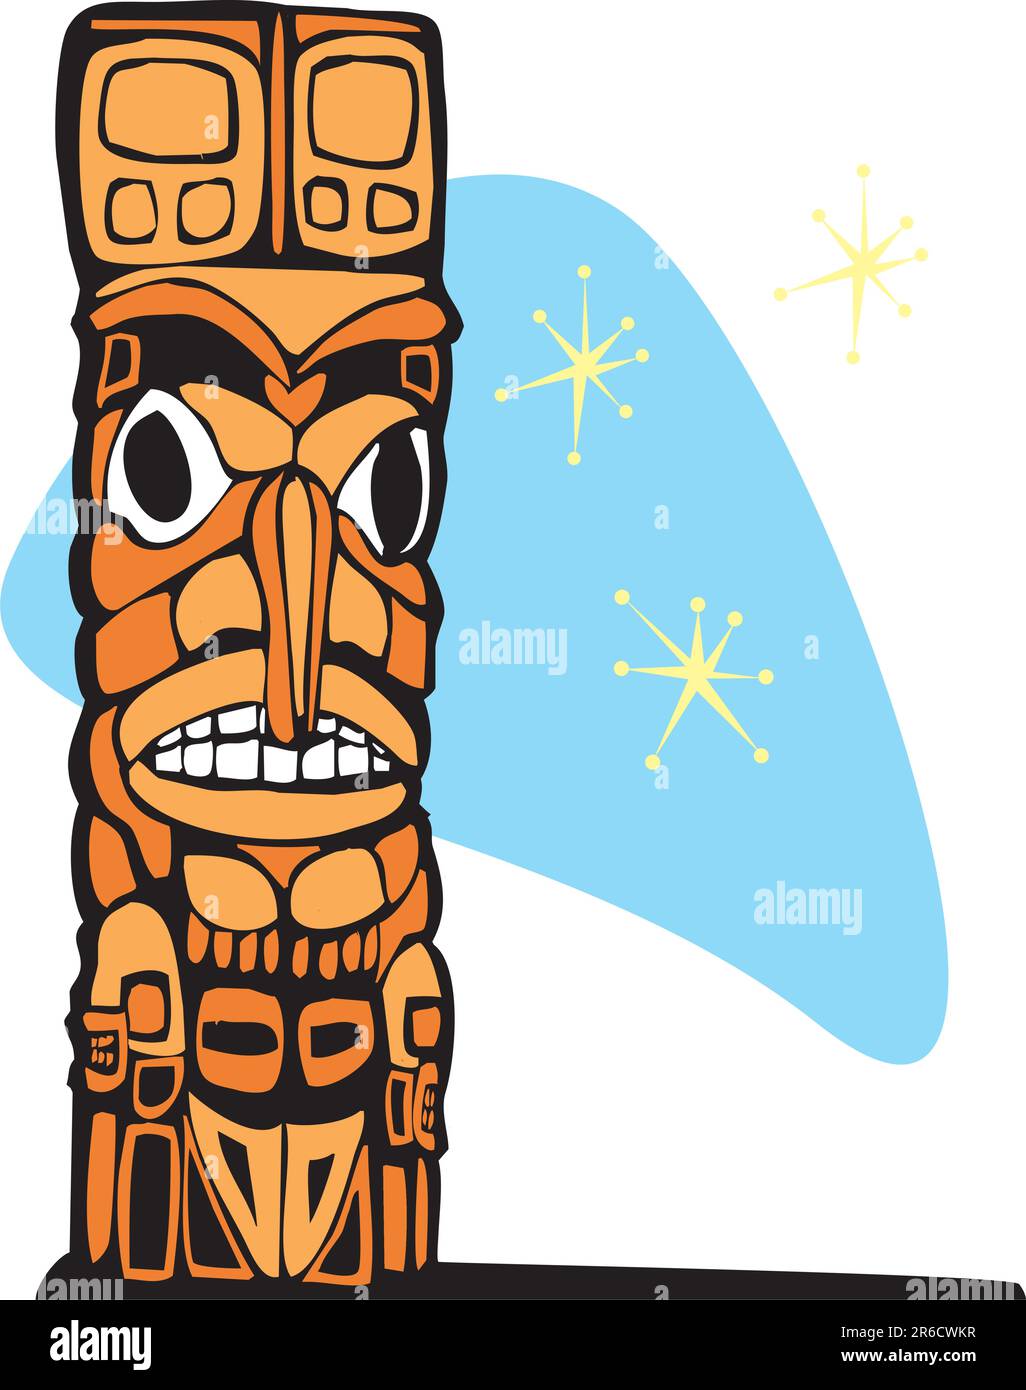 Totem with retro look and stars in the background. Stock Vector